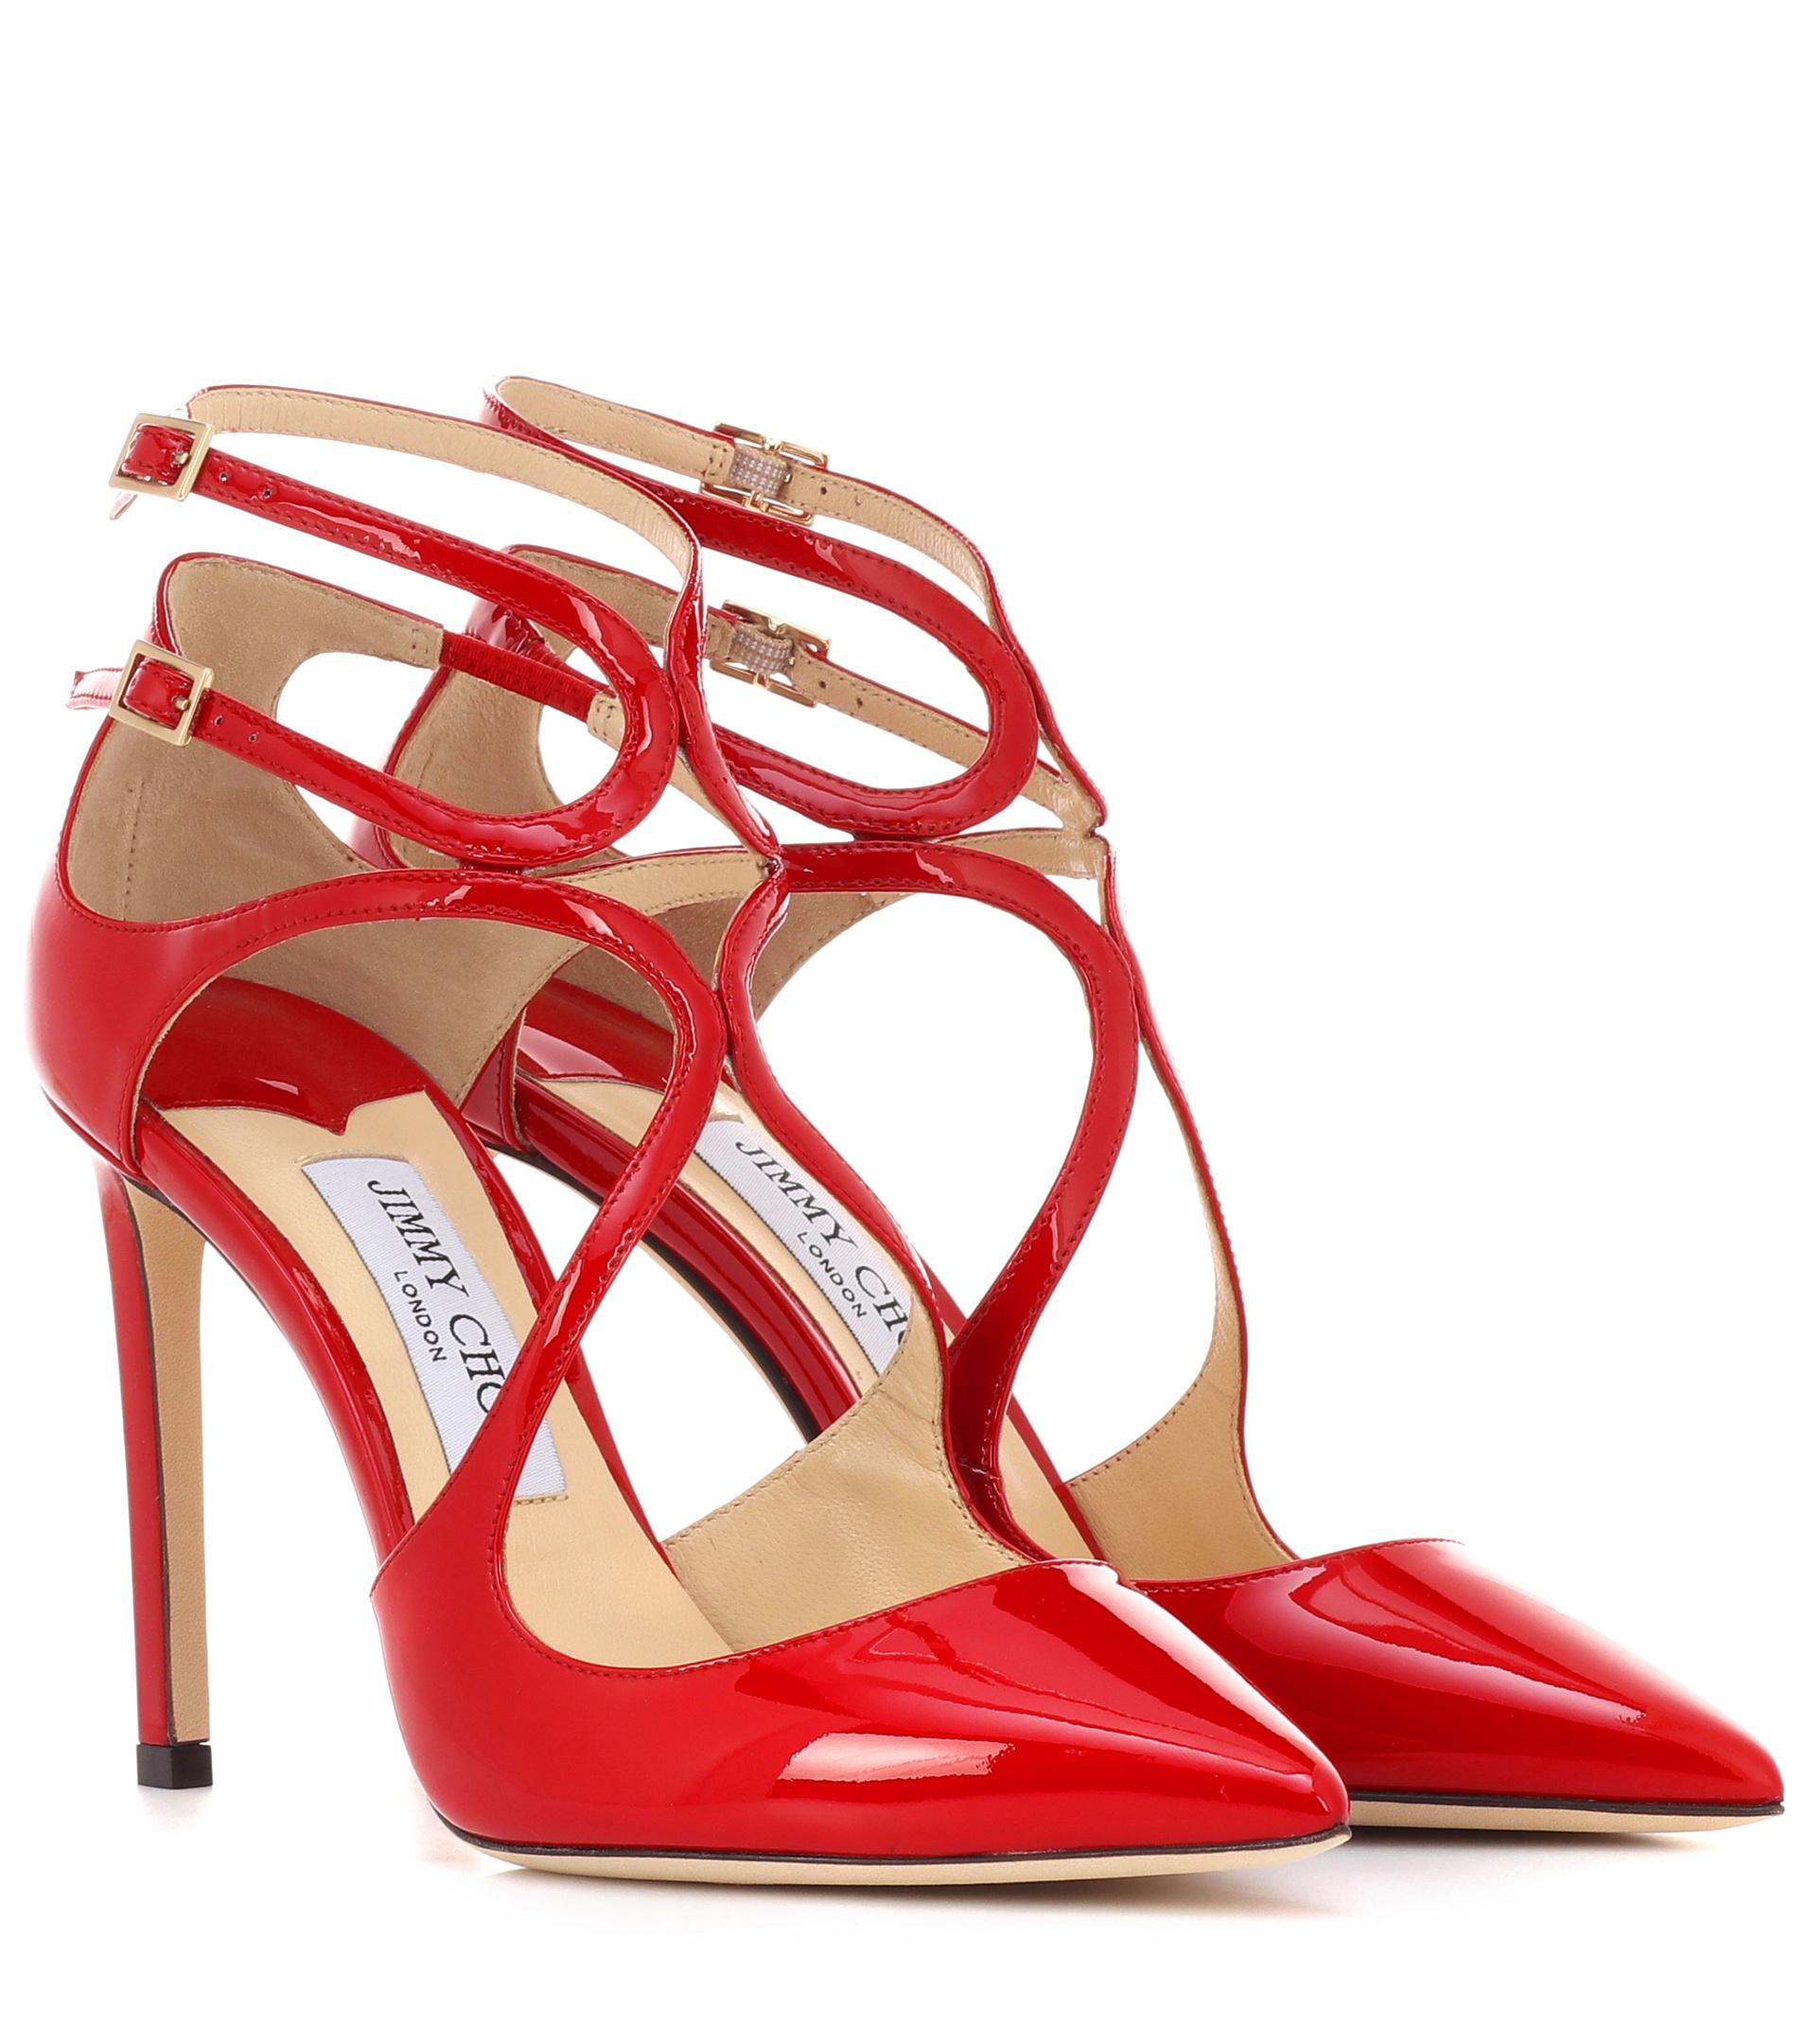 Jimmy Choo Lancer 100 Patent Leather Pumps in Red - Lyst